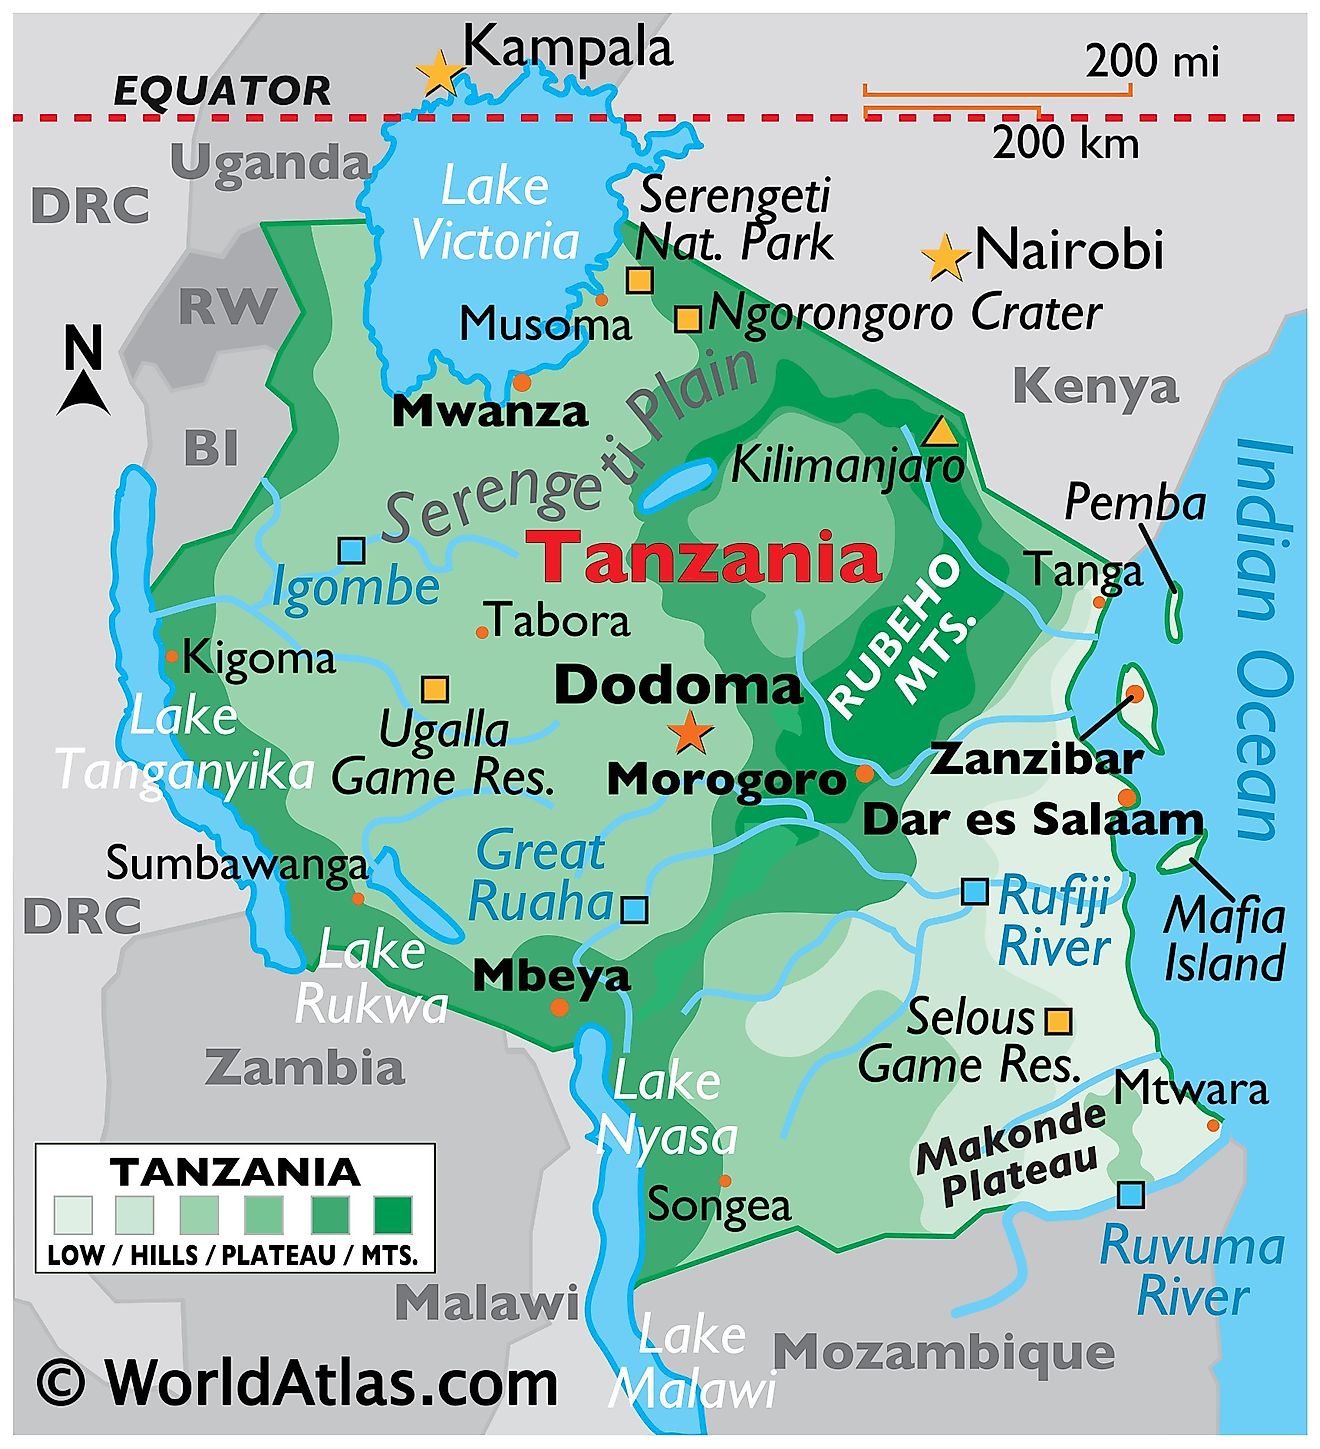 Physical Map of Tanzania with state boundaries, and major physical features like mountain ranges, rivers, lakes, national parks, etc.